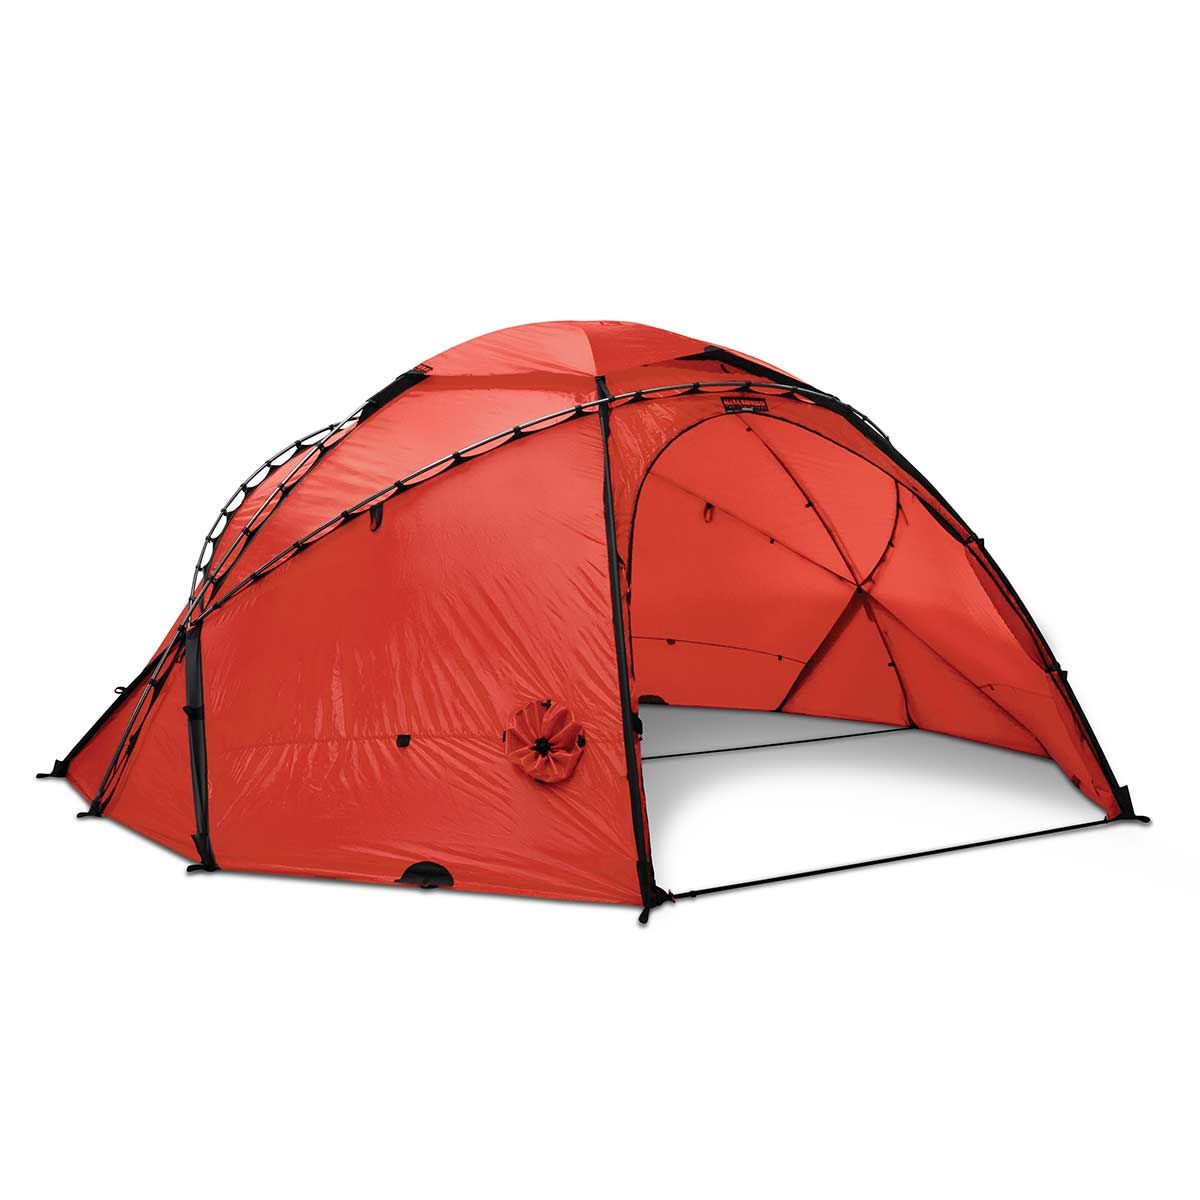 Hilleberg Atlas Package includes outer, vestibule and 8 person inner